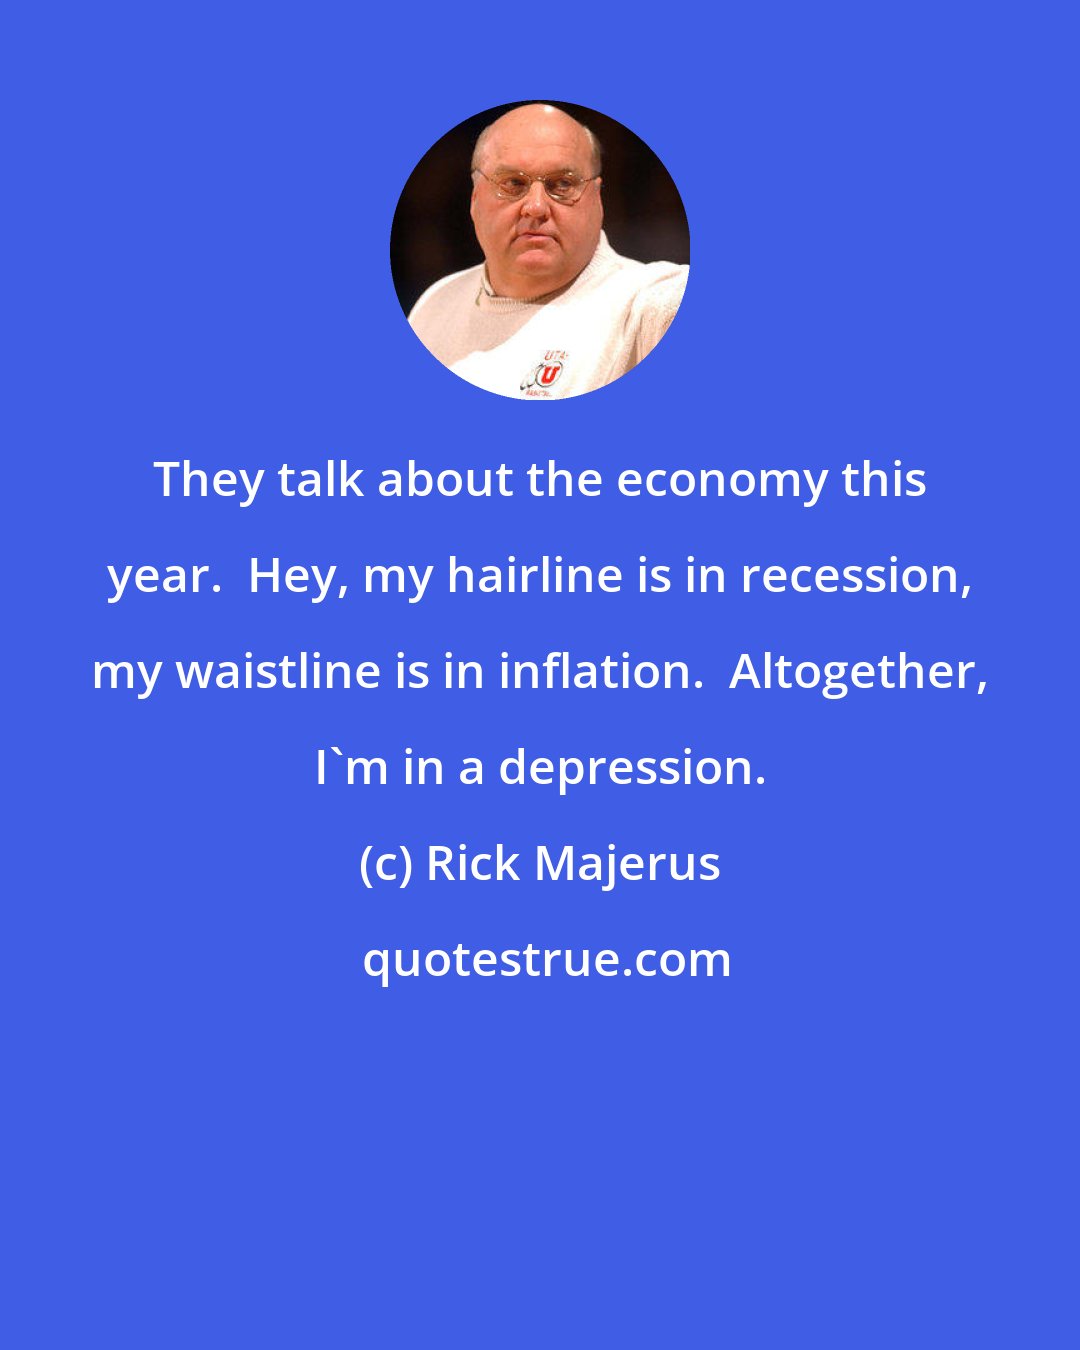 Rick Majerus: They talk about the economy this year.  Hey, my hairline is in recession, my waistline is in inflation.  Altogether, I'm in a depression.